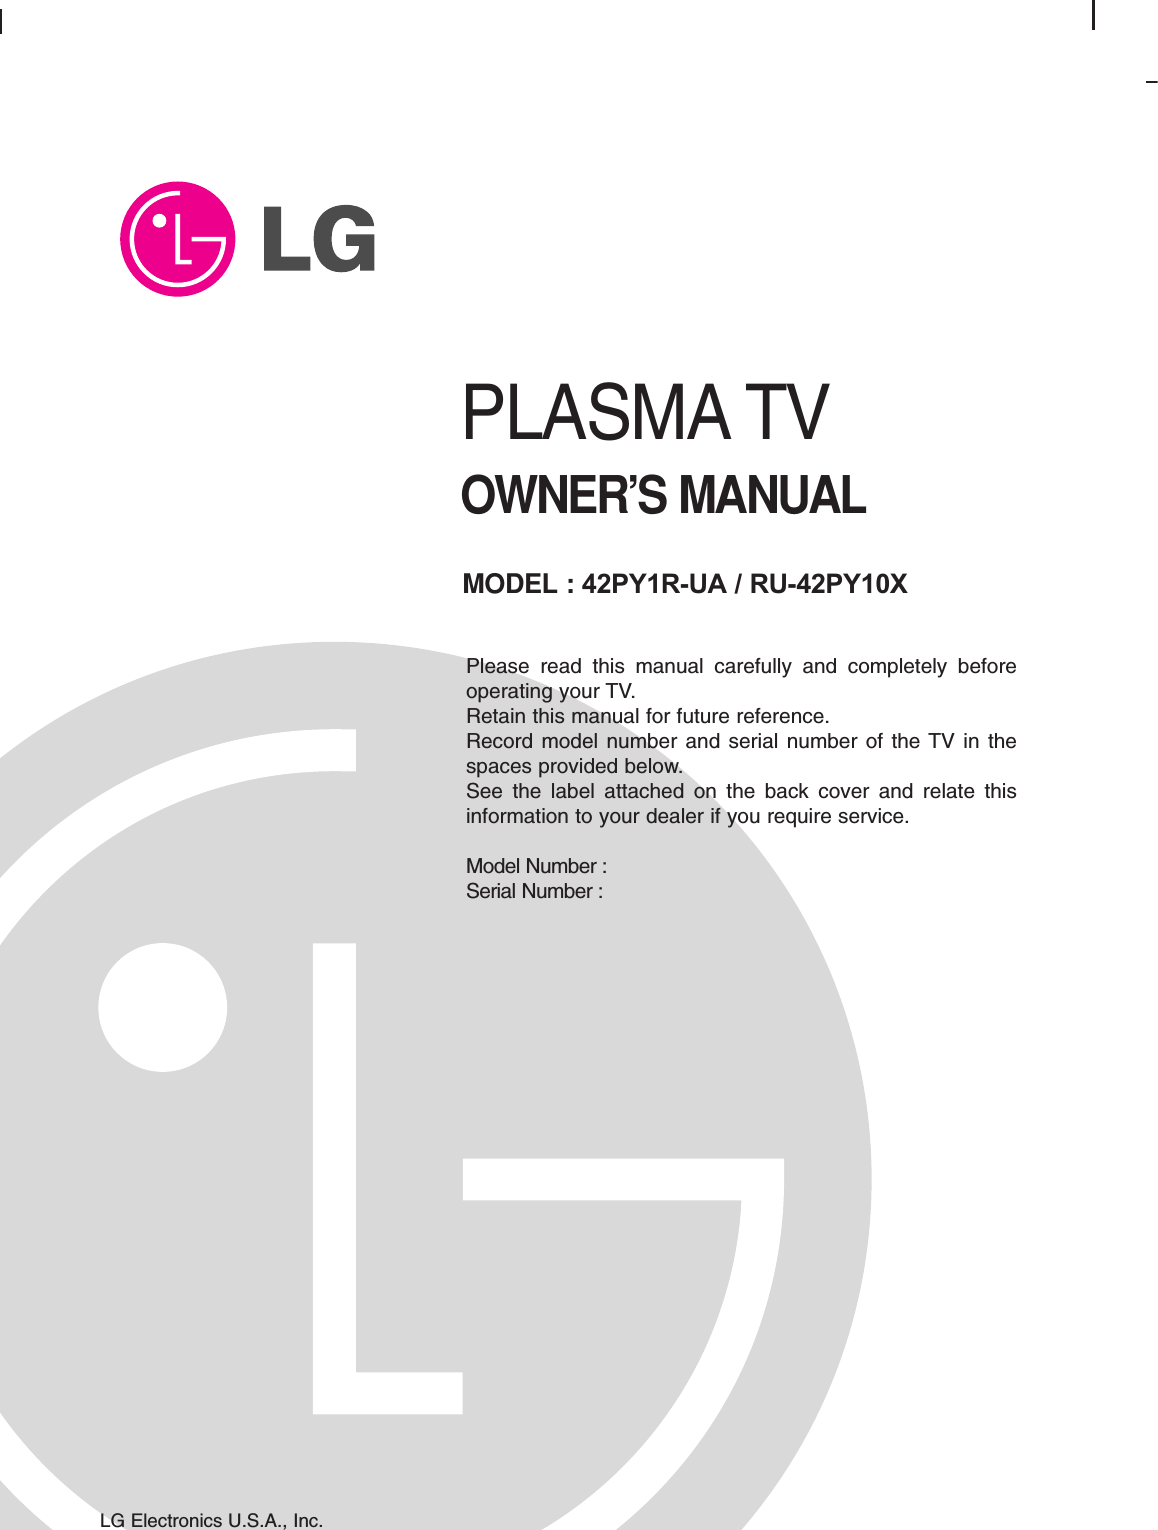 PLASMA TVOWNER’S MANUALPlease read this manual carefully and completely beforeoperating your TV. Retain this manual for future reference.Record model number and serial number of the TV in thespaces provided below. See the label attached on the back cover and relate thisinformation to your dealer if you require service.Model Number : Serial Number : MODEL : 42PY1R-UA / RU-42PY10XLG Electronics U.S.A., Inc.